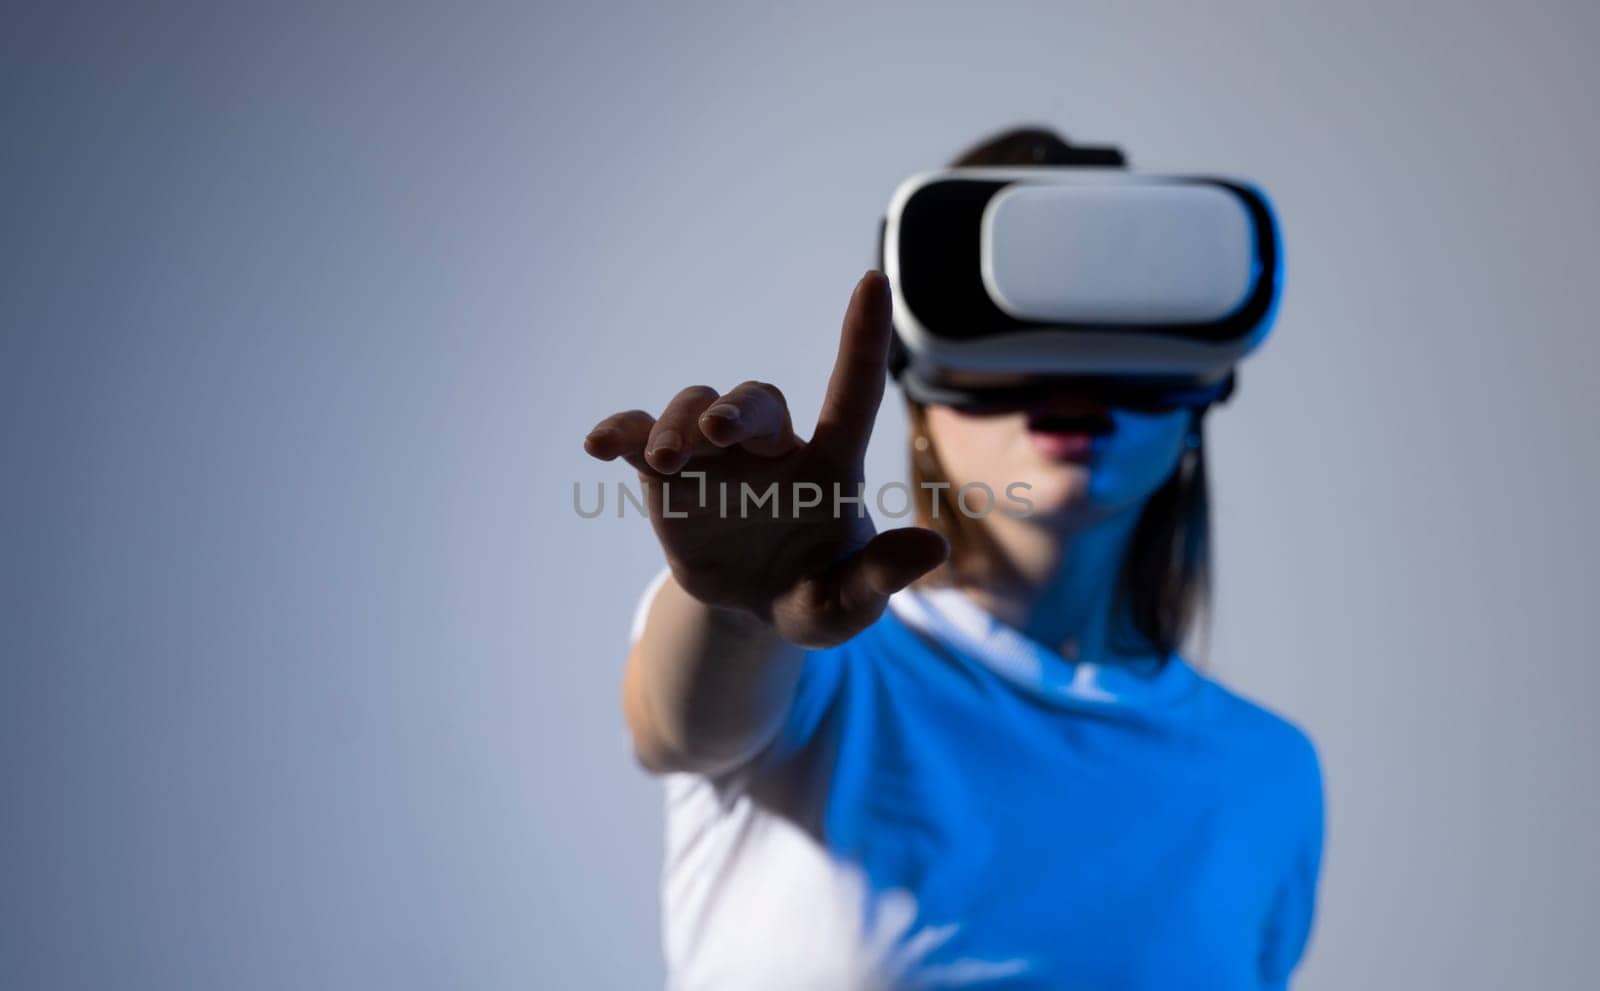 Female engineer wearing virtual reality headset designing a new pruducts or technologis using VR technology. Development and prototyping software